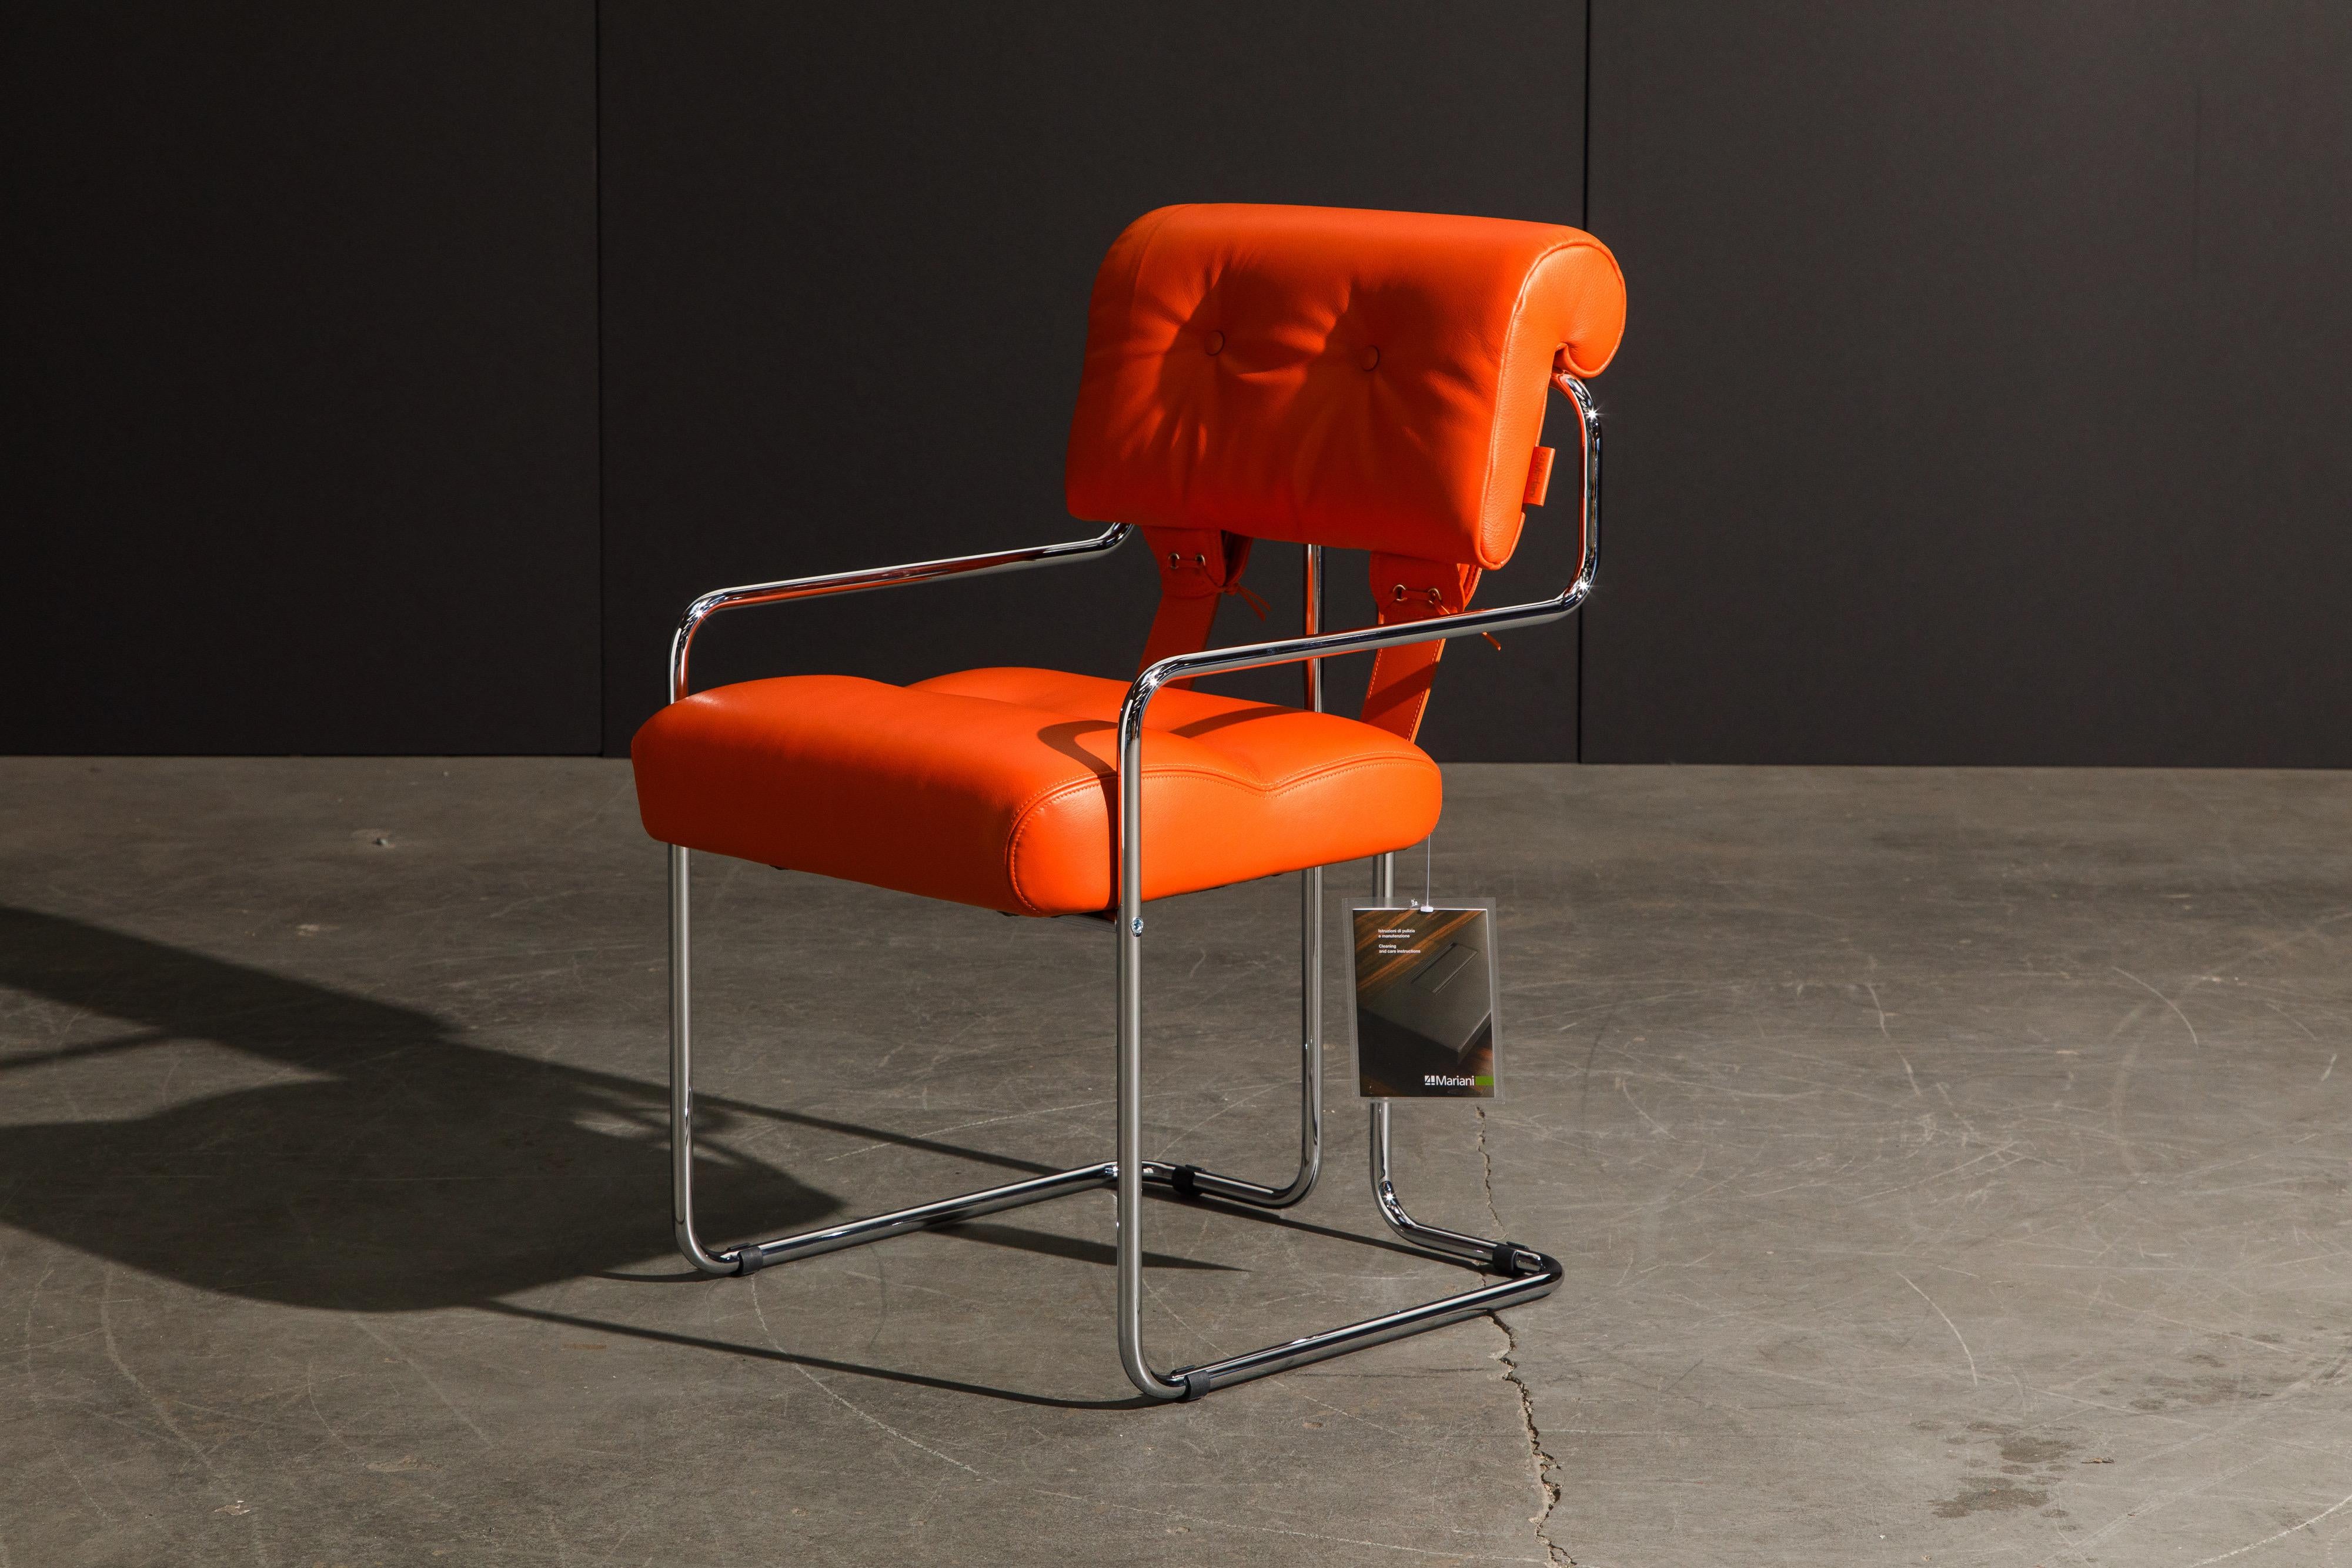 Currently, the most coveted dining chairs by interior designers are 'Tucroma' chairs by Guido Faleschini for i4 Mariani, and we have this incredible set of four (4) Tucroma armchairs in beautiful hot orange leather with polished chrome frames. The